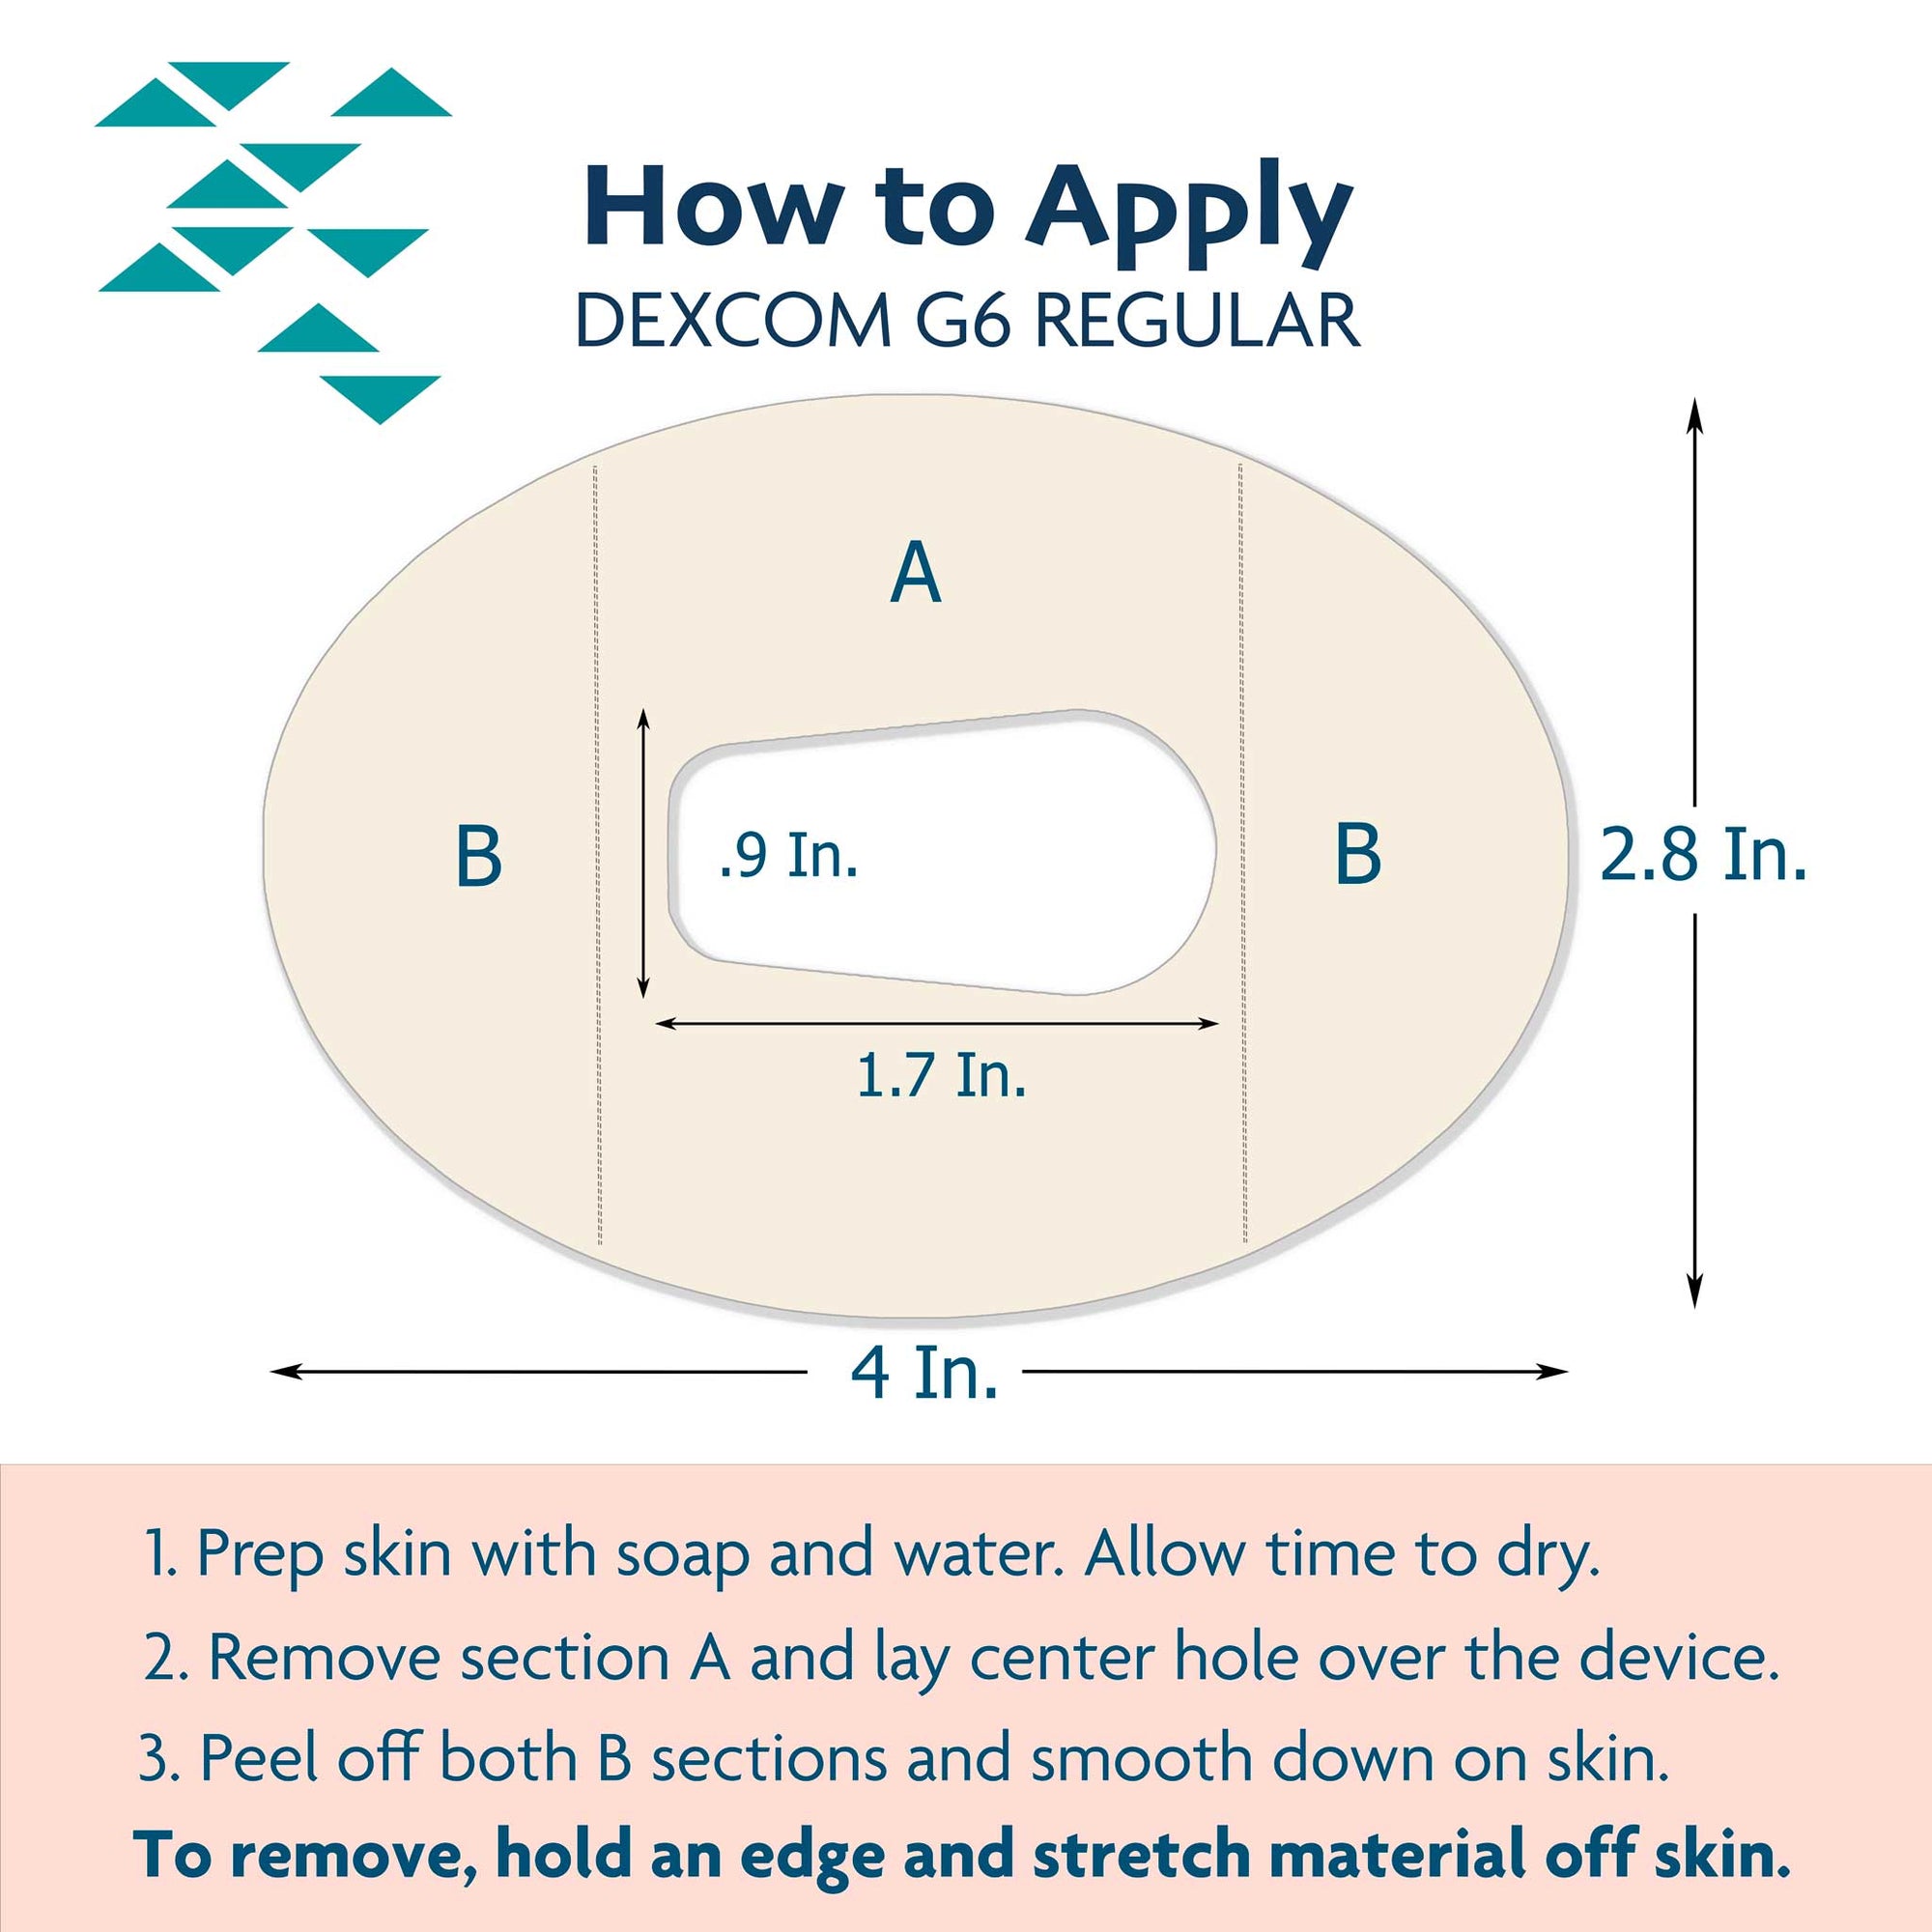 ExpressionMed How to apply Dexcom tape to your CGM device